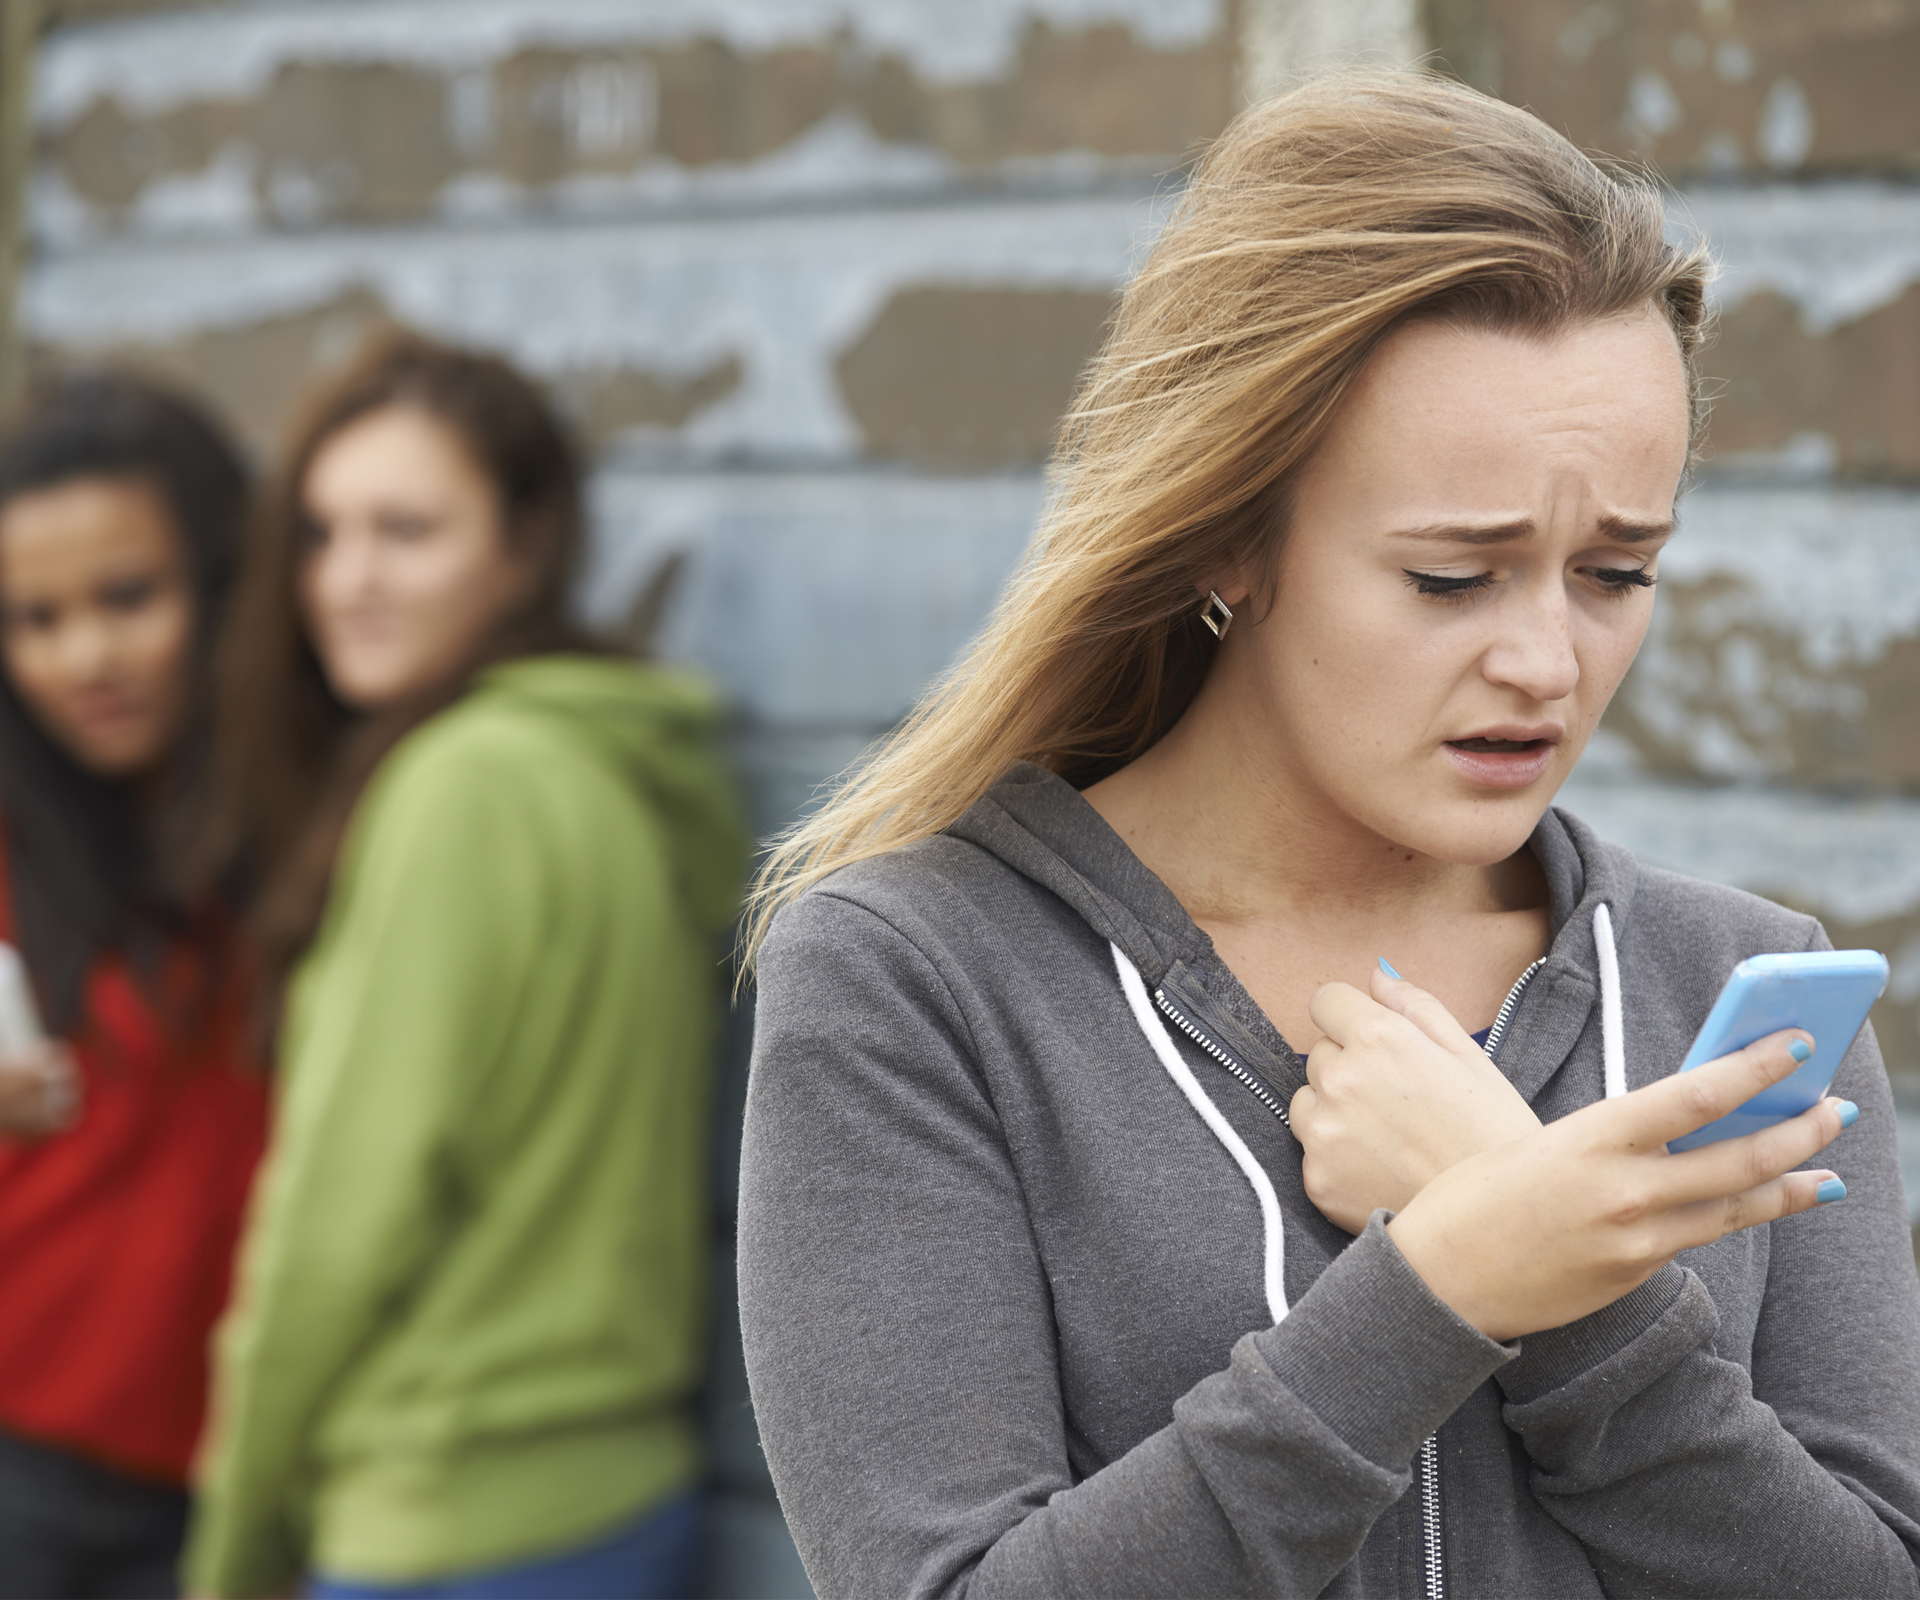 Cyber bullies will now face jail time in New Zealand